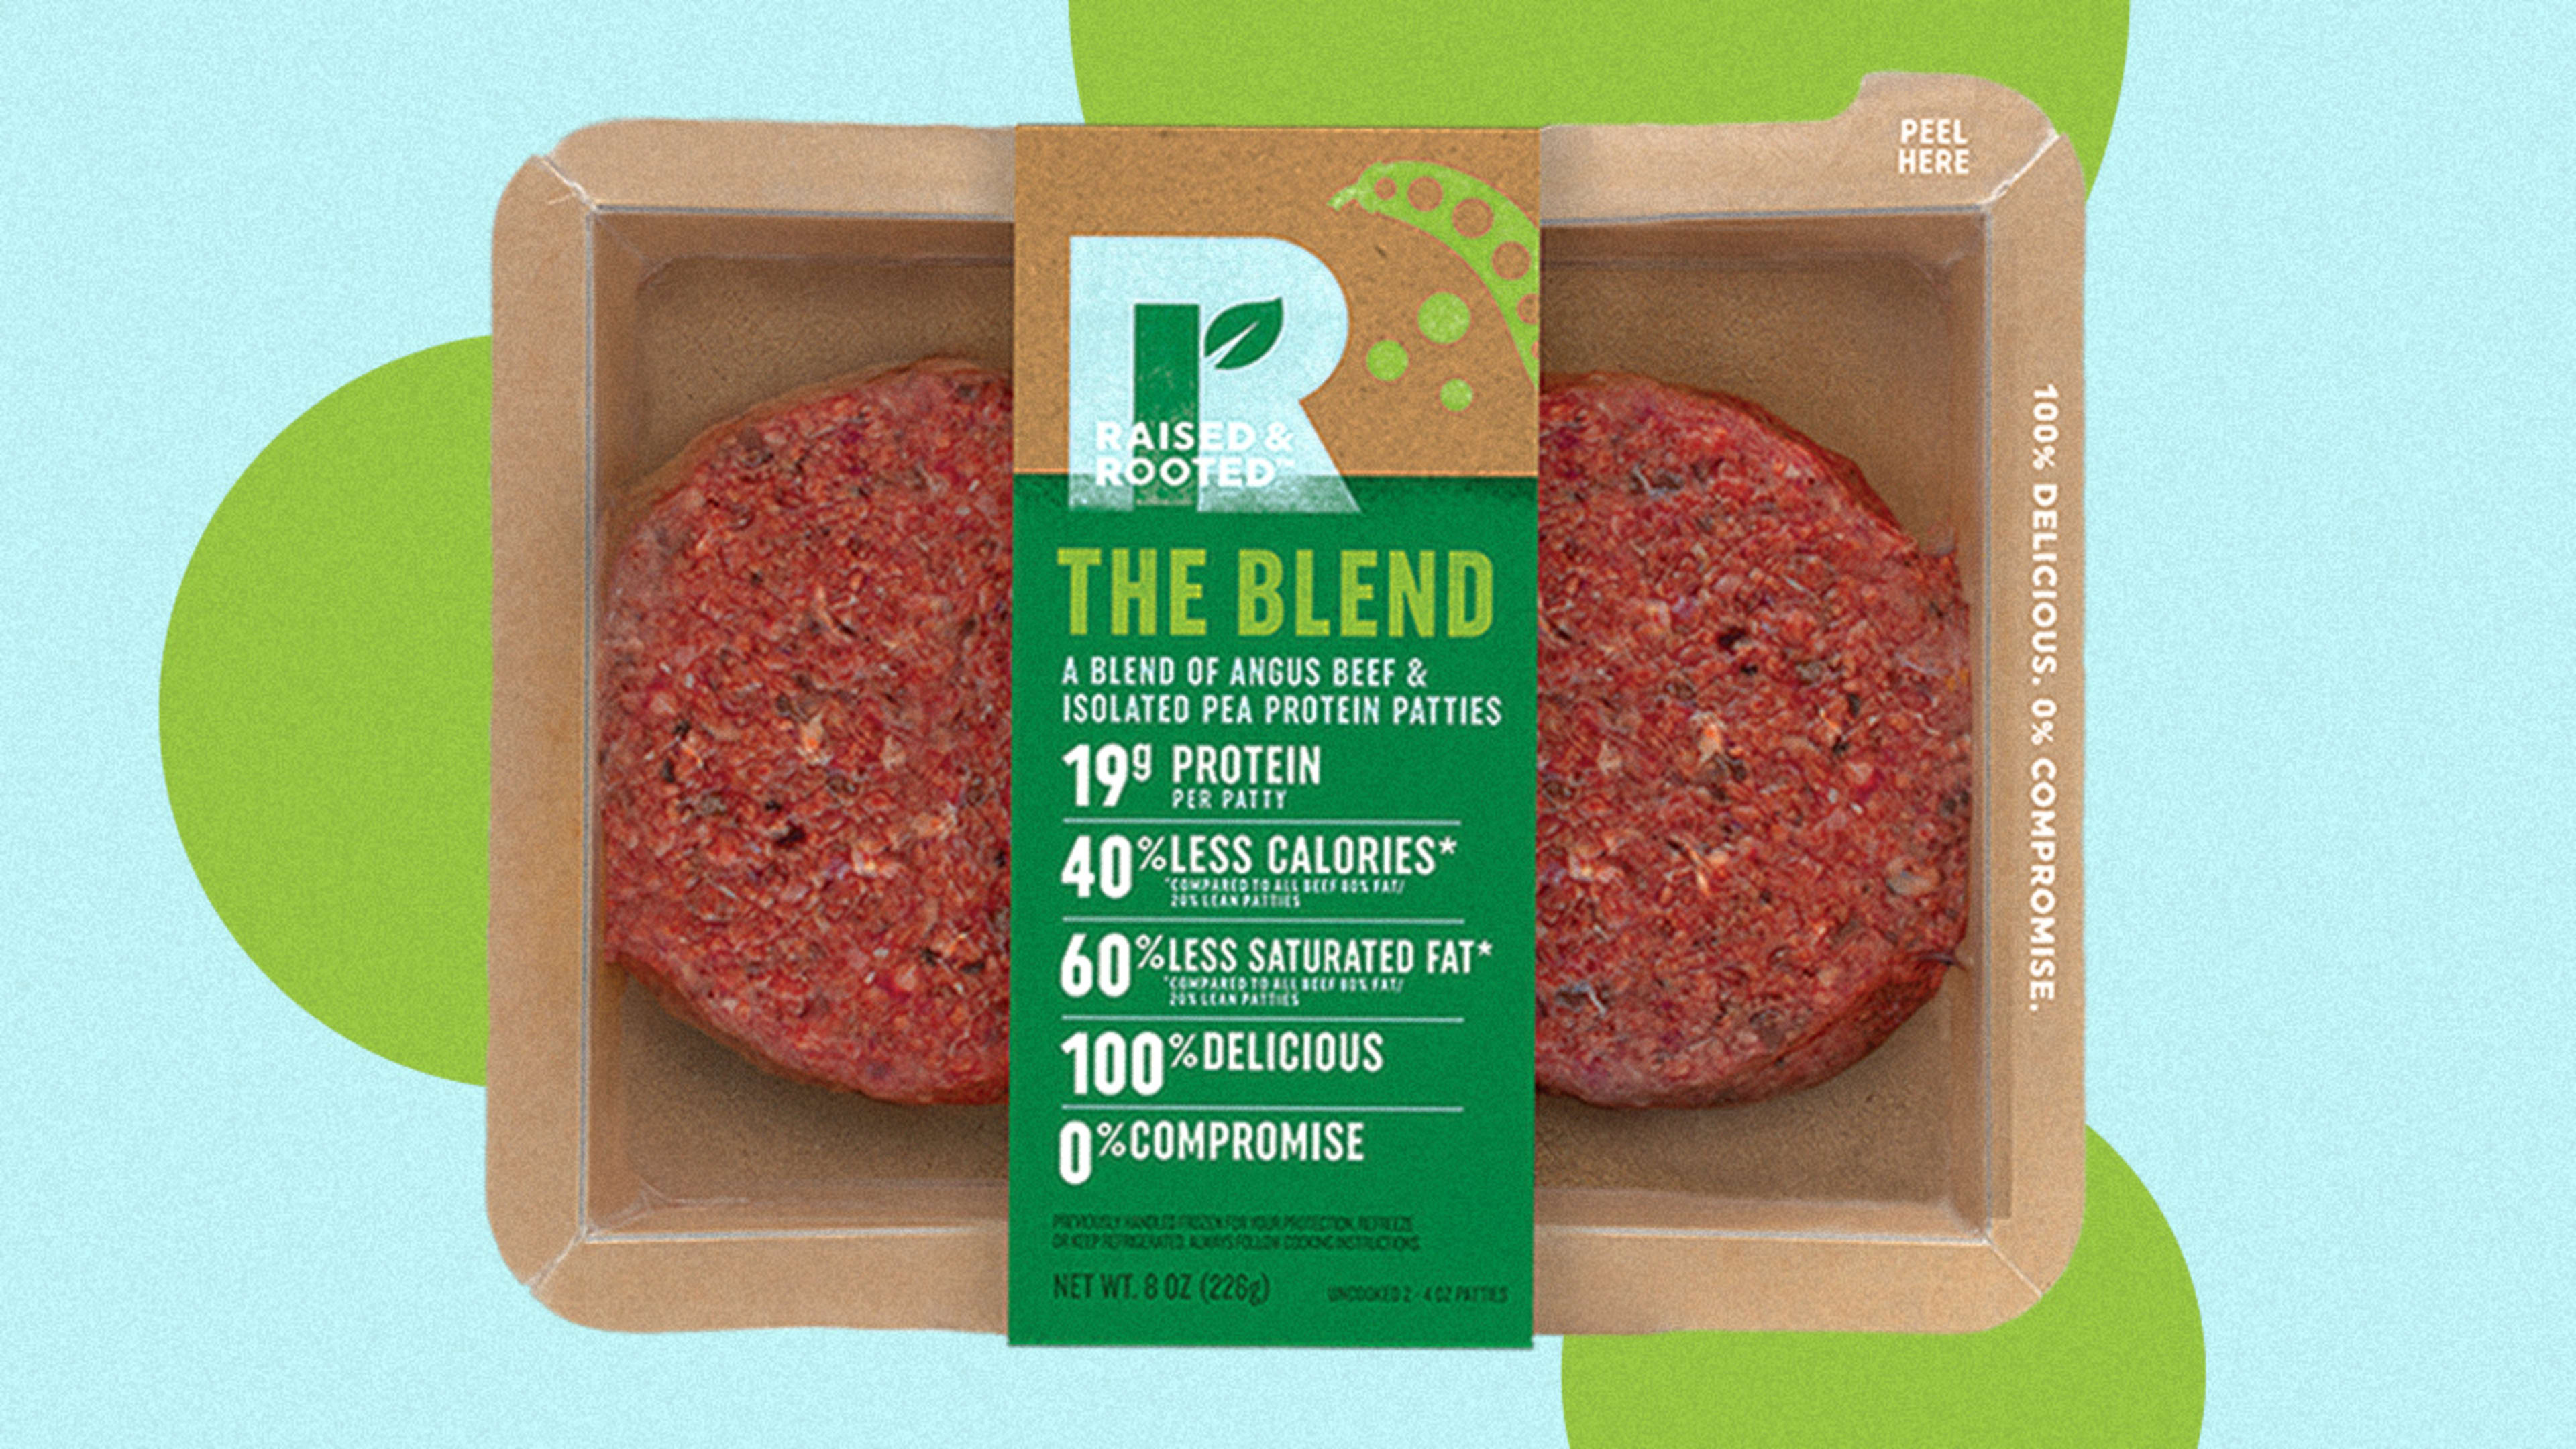 Big meat giant Tyson is launching a new part-beef, part-pea burger